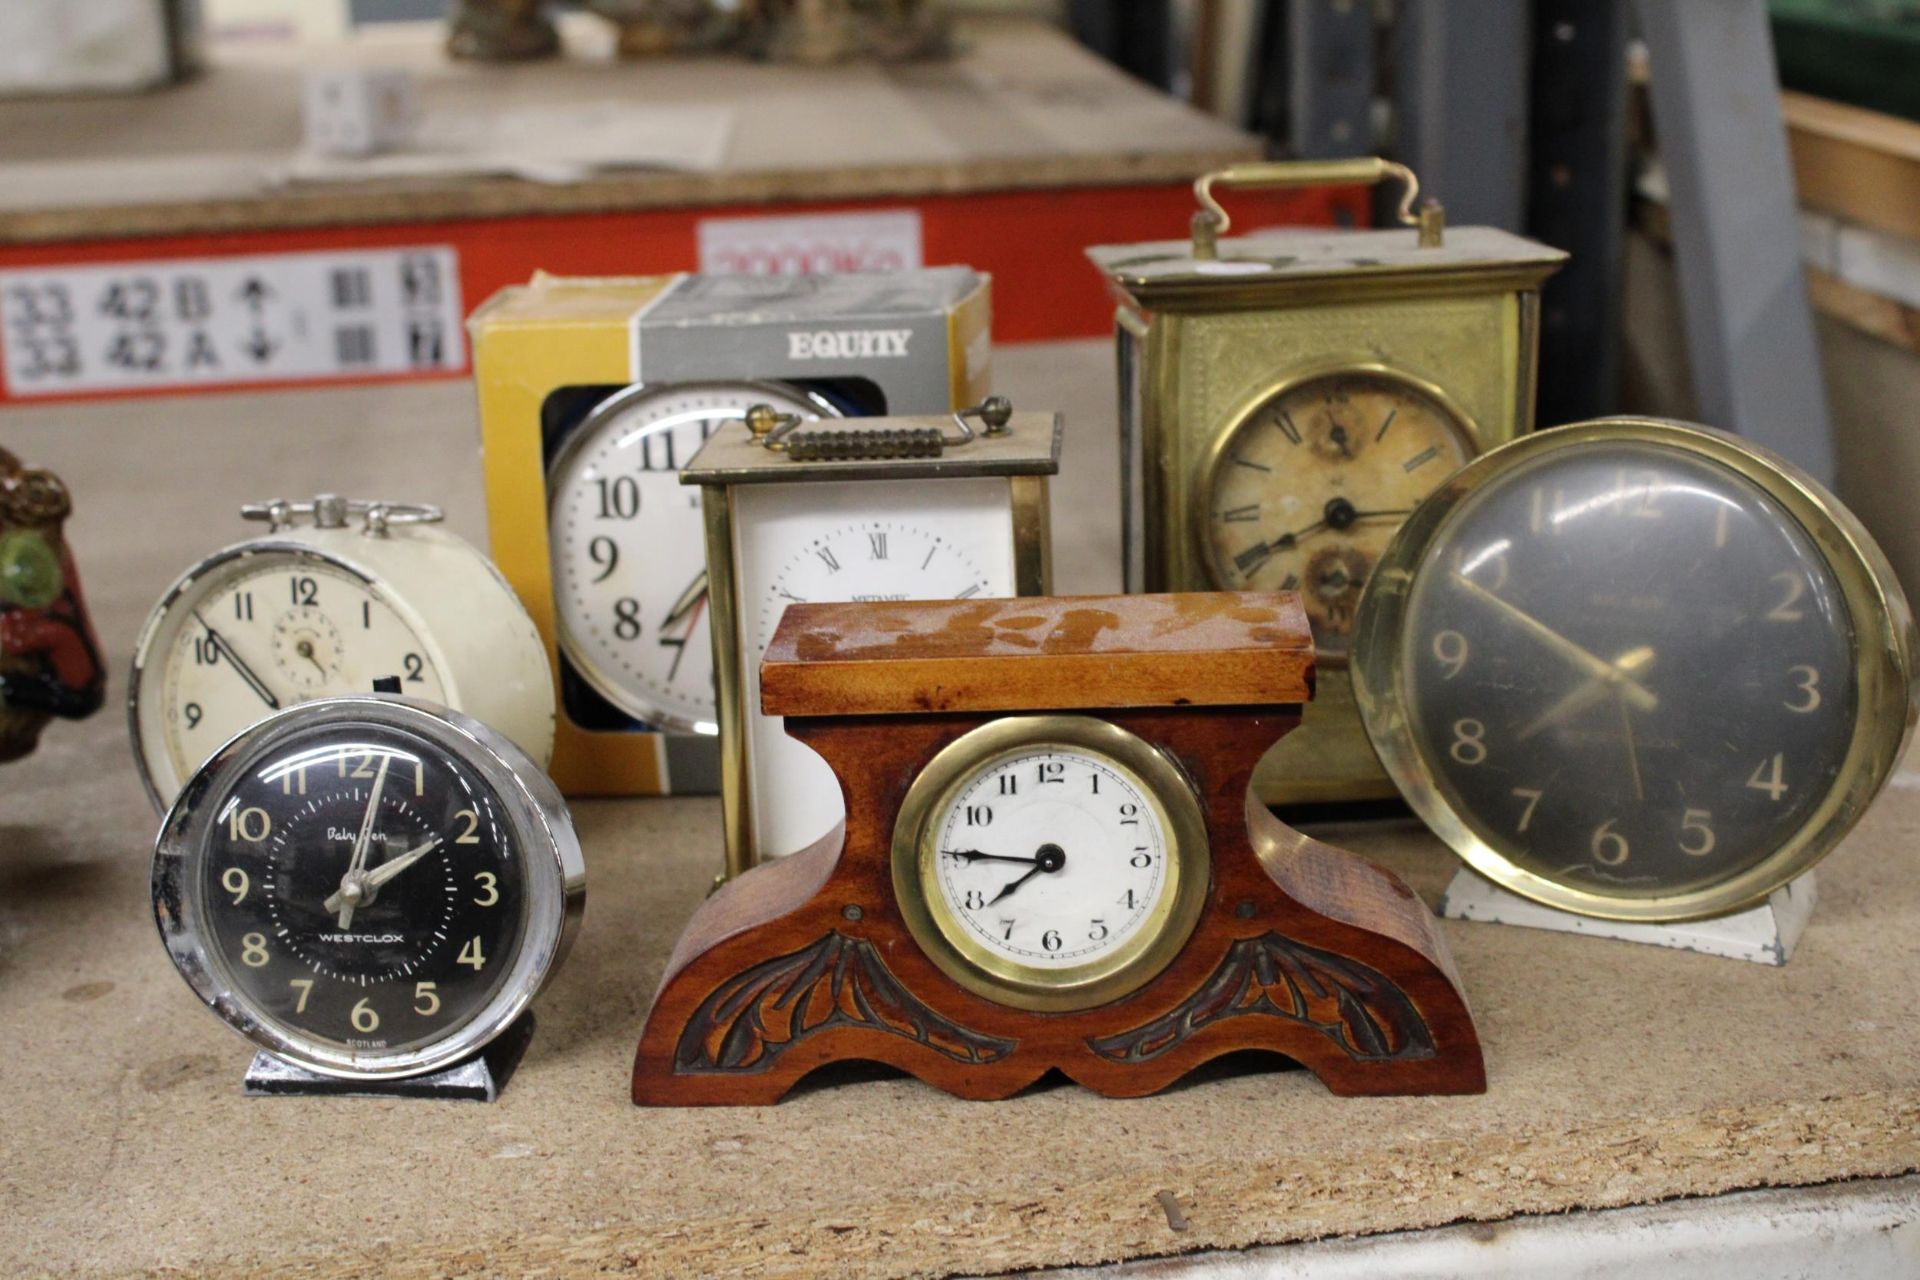 A QUANTITY OF VINTAGE MANTLE AND ALARM CLOCKS - 7 IN TOTAL